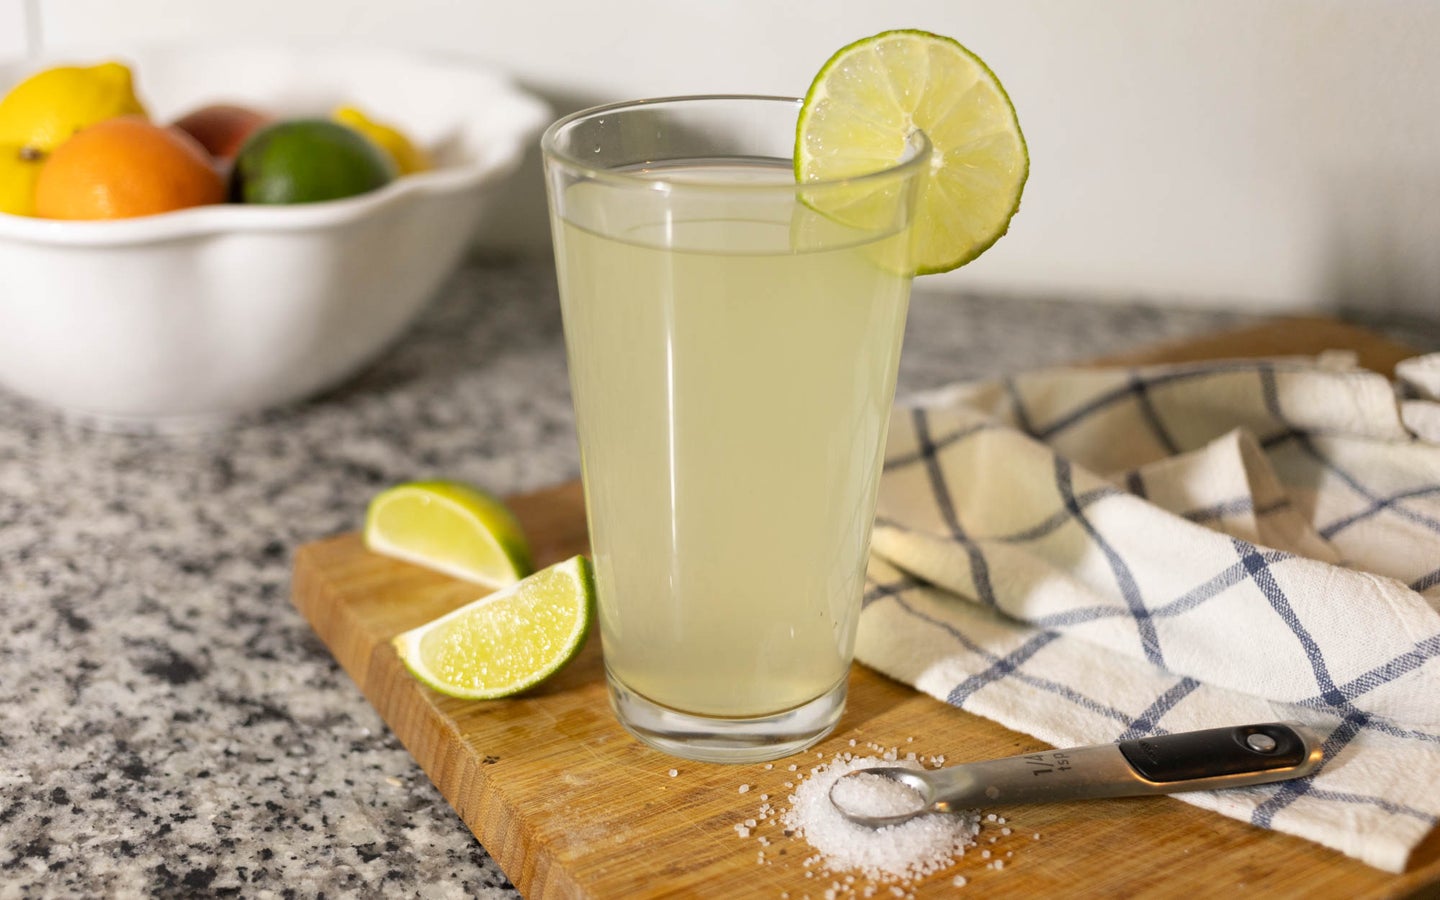 A homemade electrolyte drink that's a pale green lime color, on a cutting board next to some lime slices and sugar.